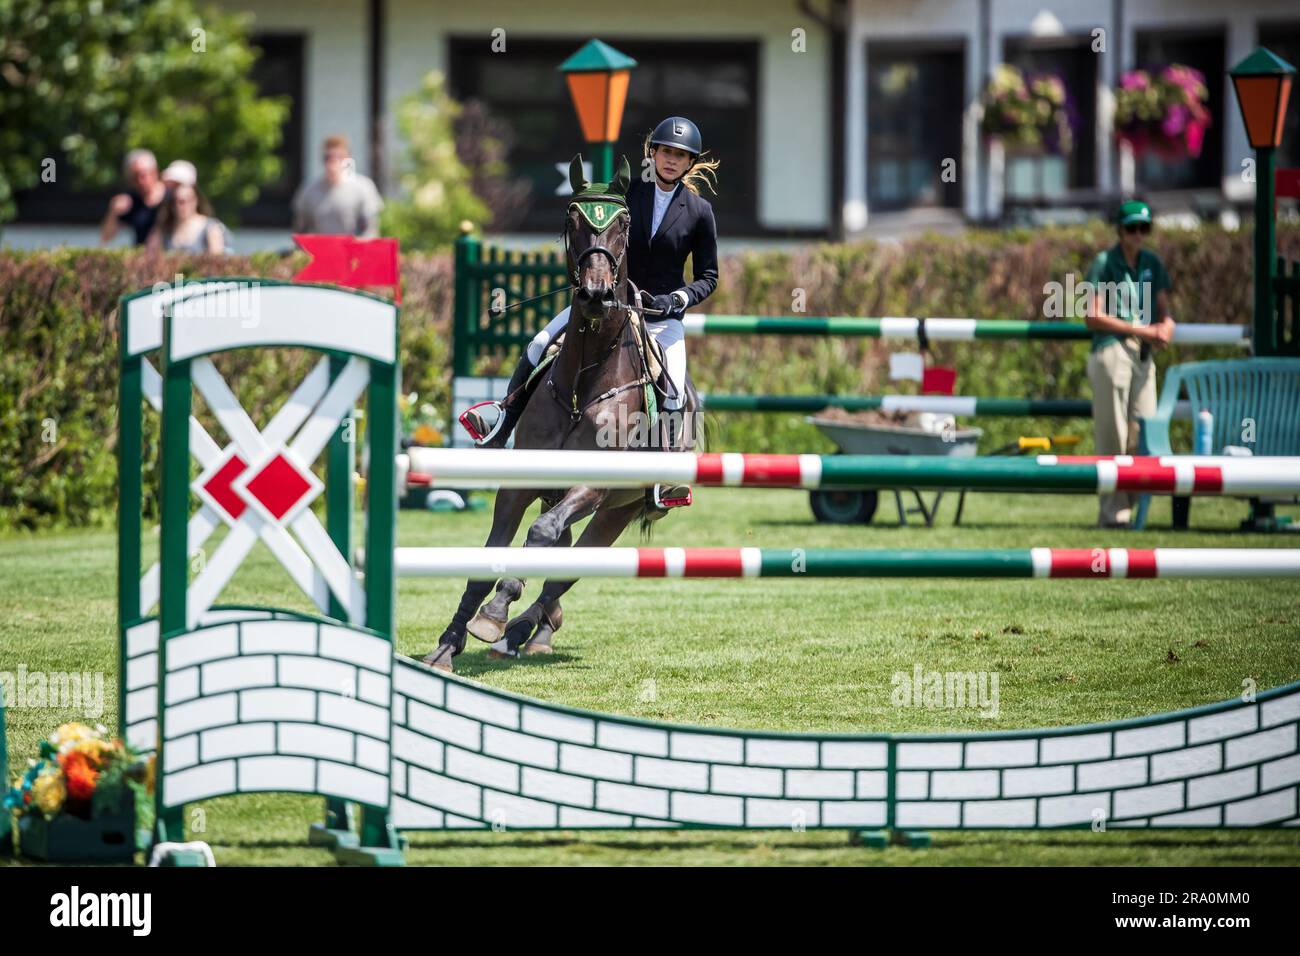 Florencia Vega of Mexico competing at the Pan American Show at Spruce Meadows in Calgary, Alberta, Canada on June 29, 2023. Stock Photo